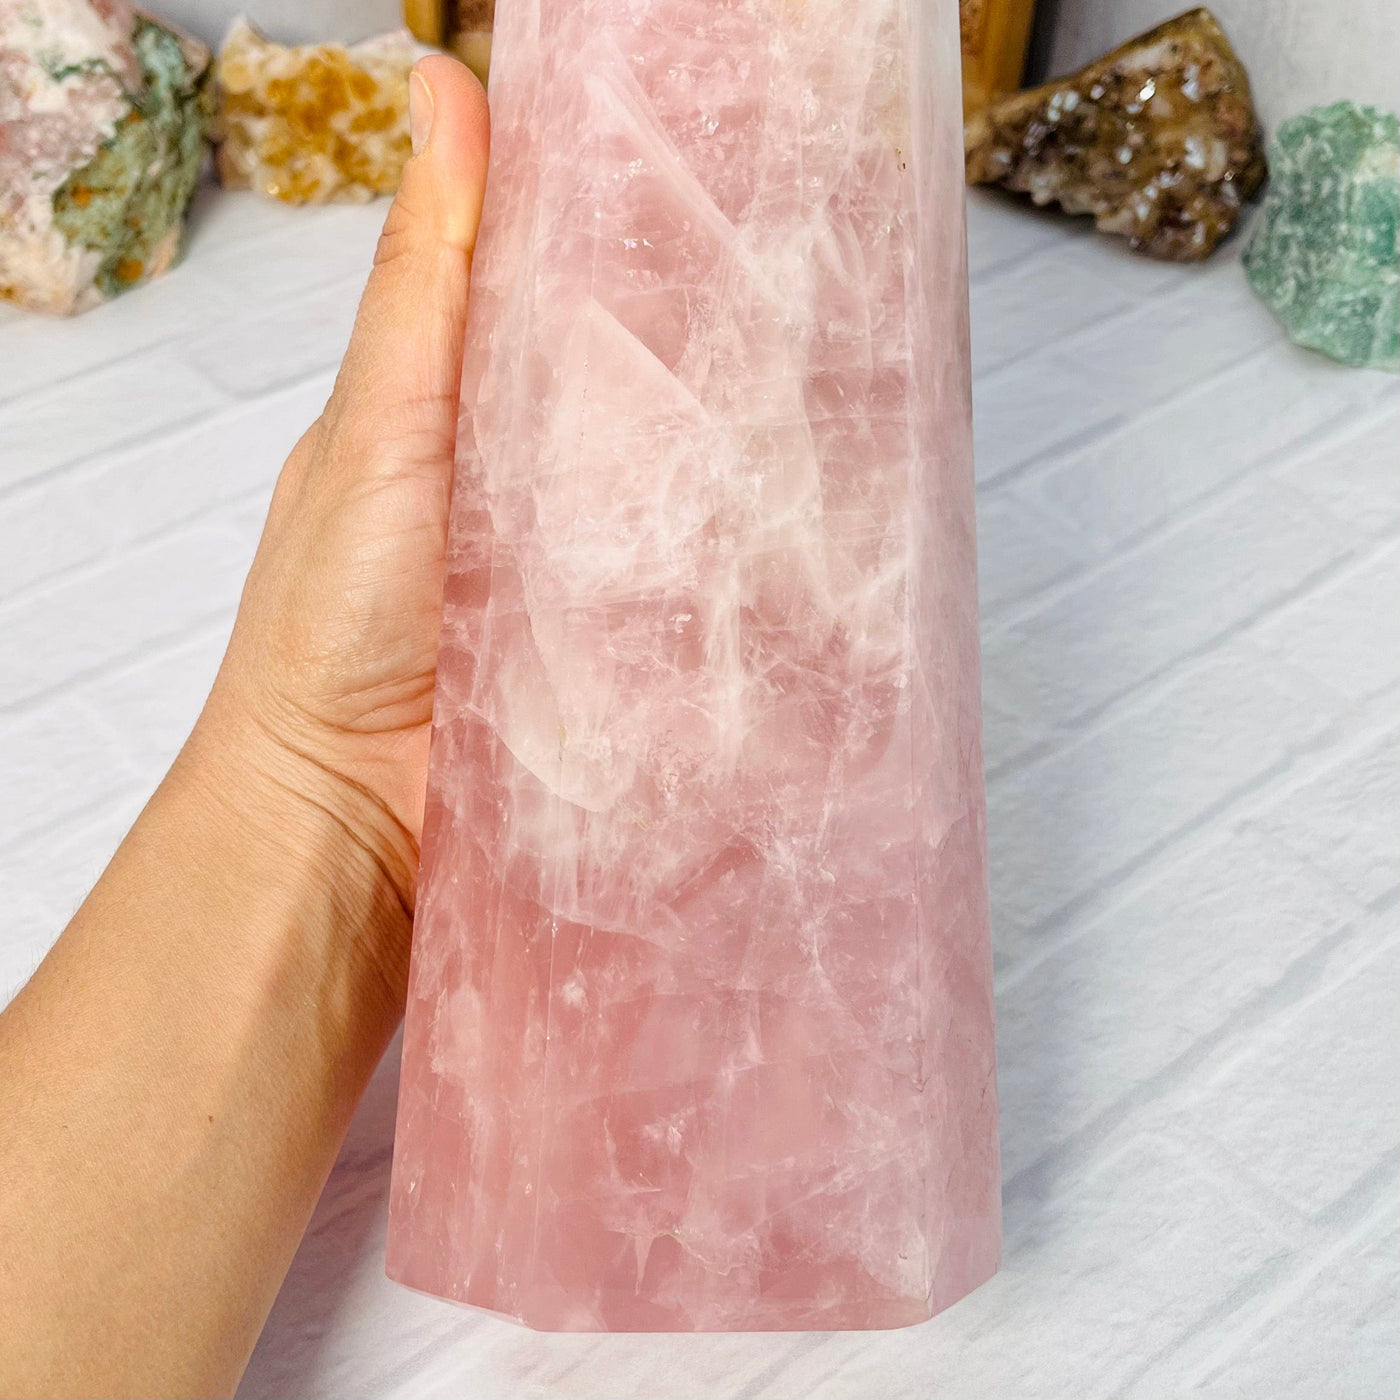 Up close view of the lower half of the Rose Quartz Polished Tower, held up in woman's hand.